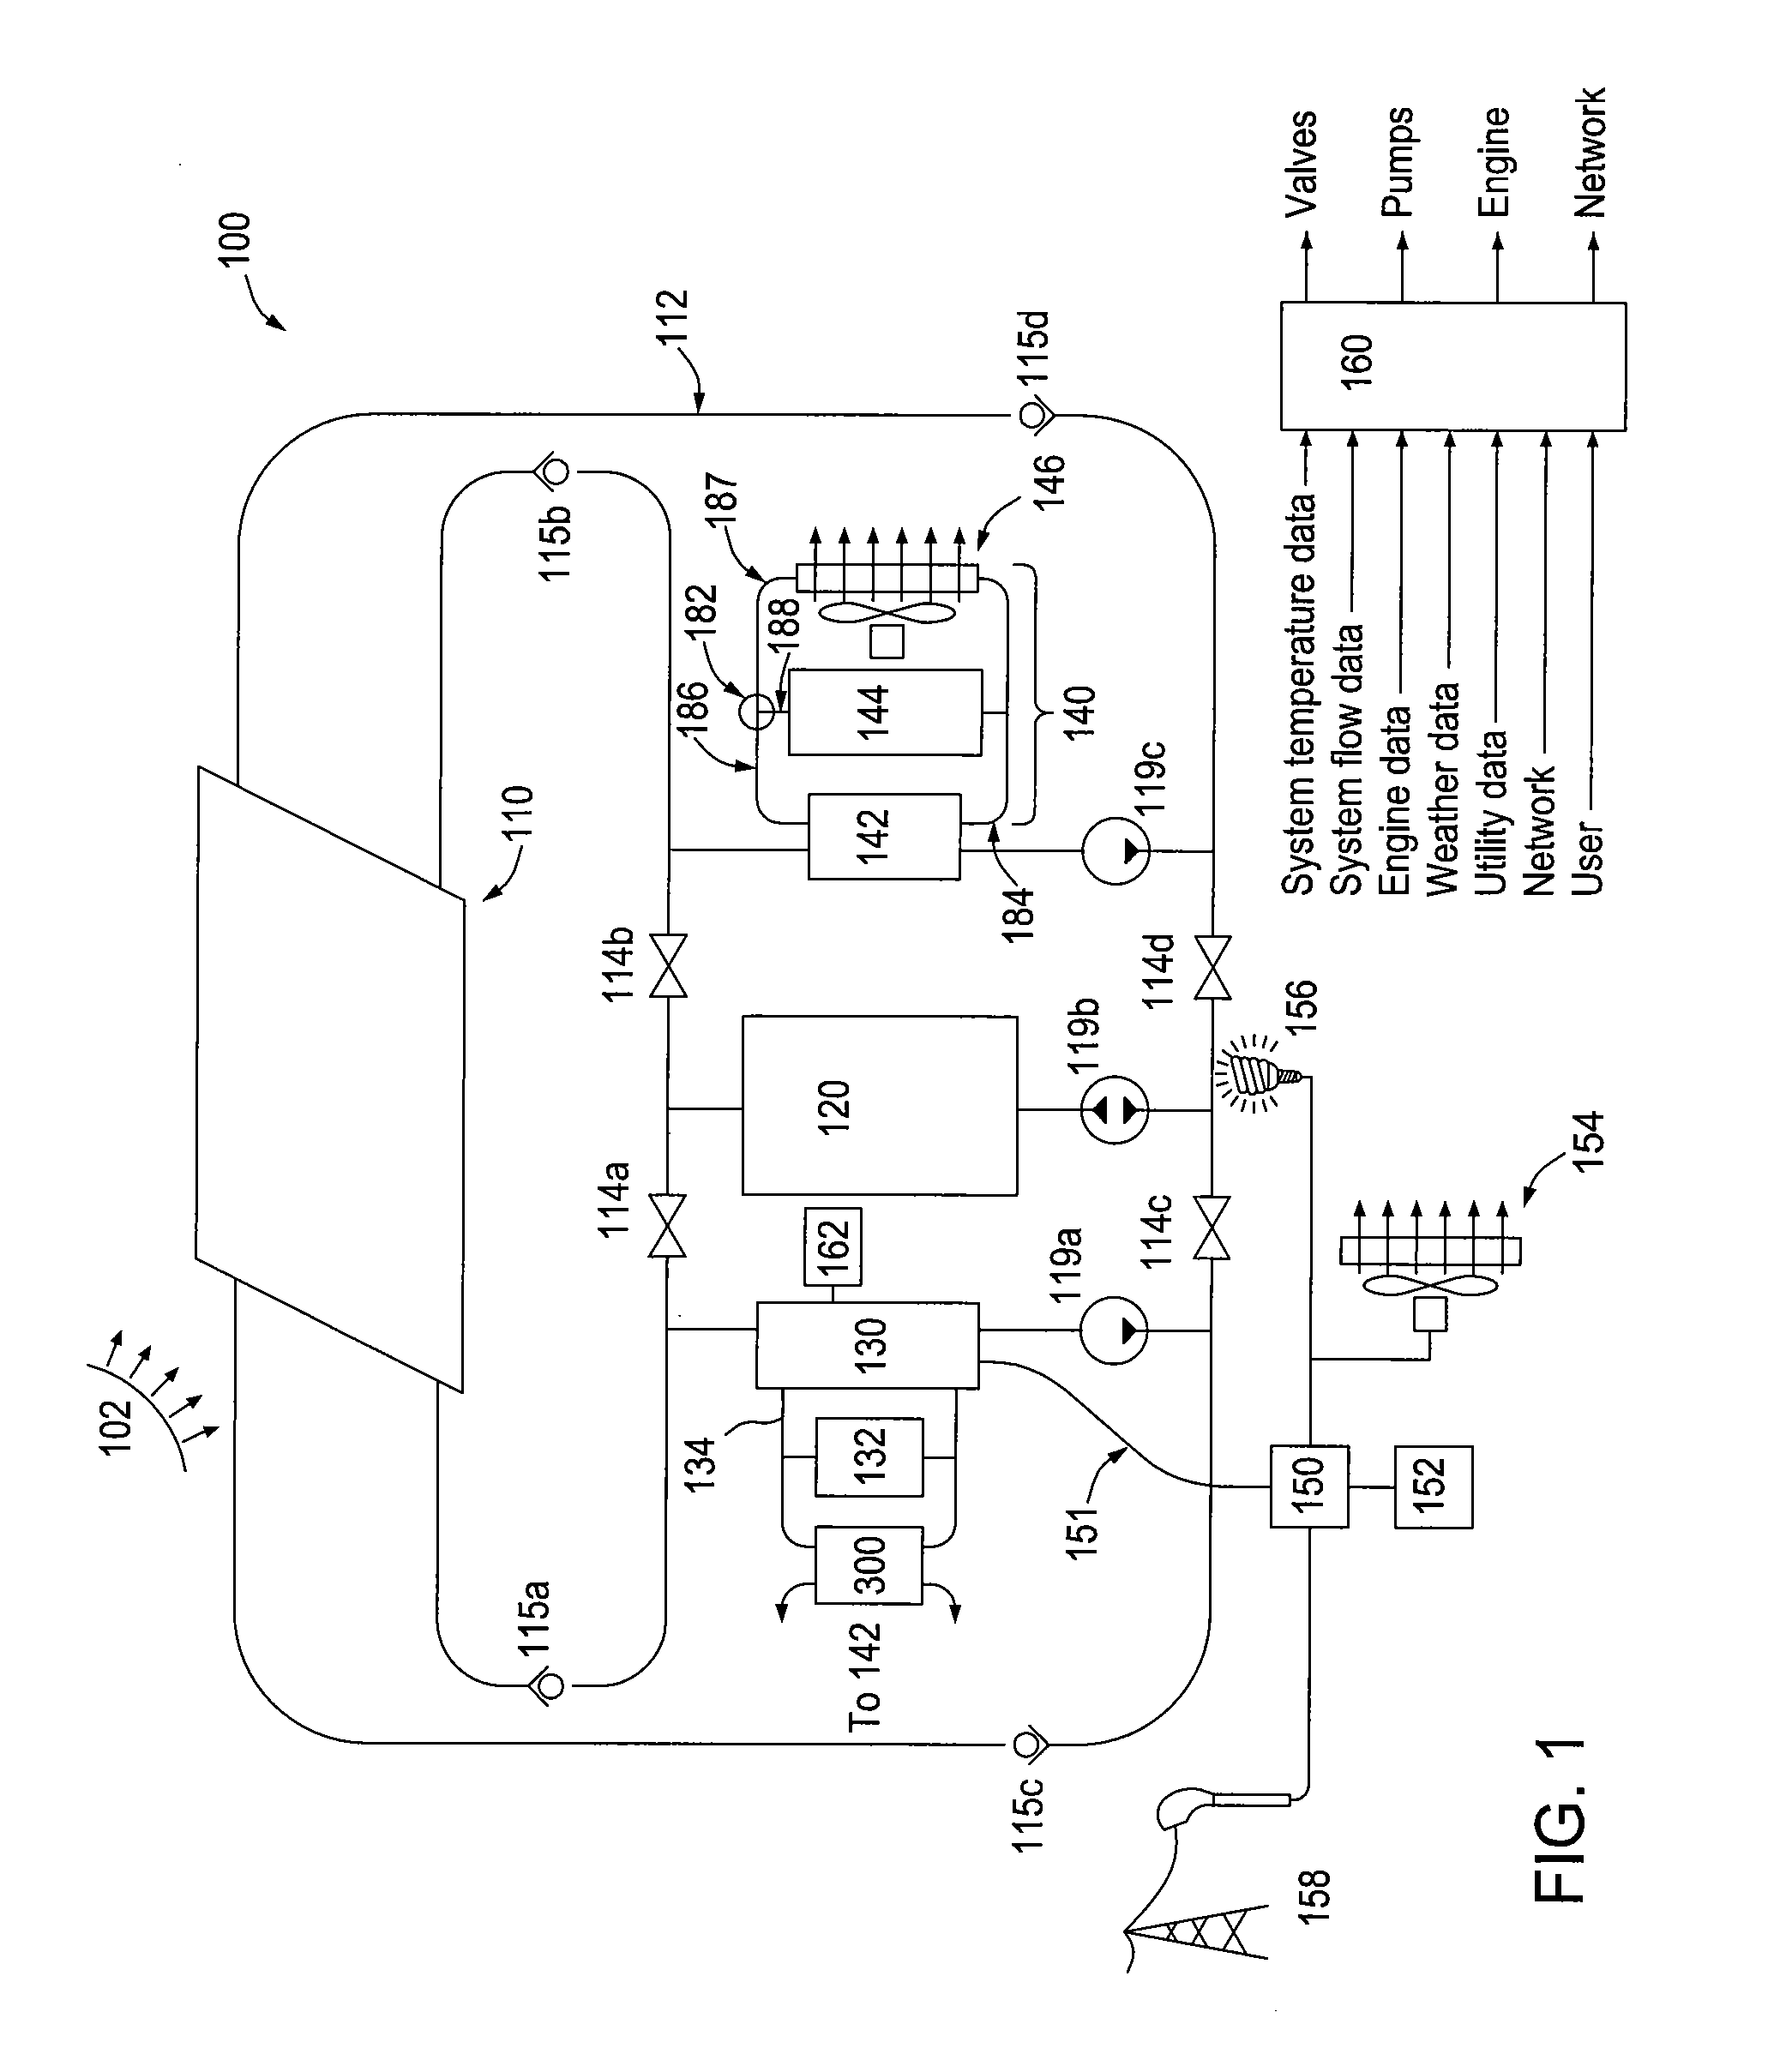 Control of power generation system having thermal energy and thermodynamic engine components